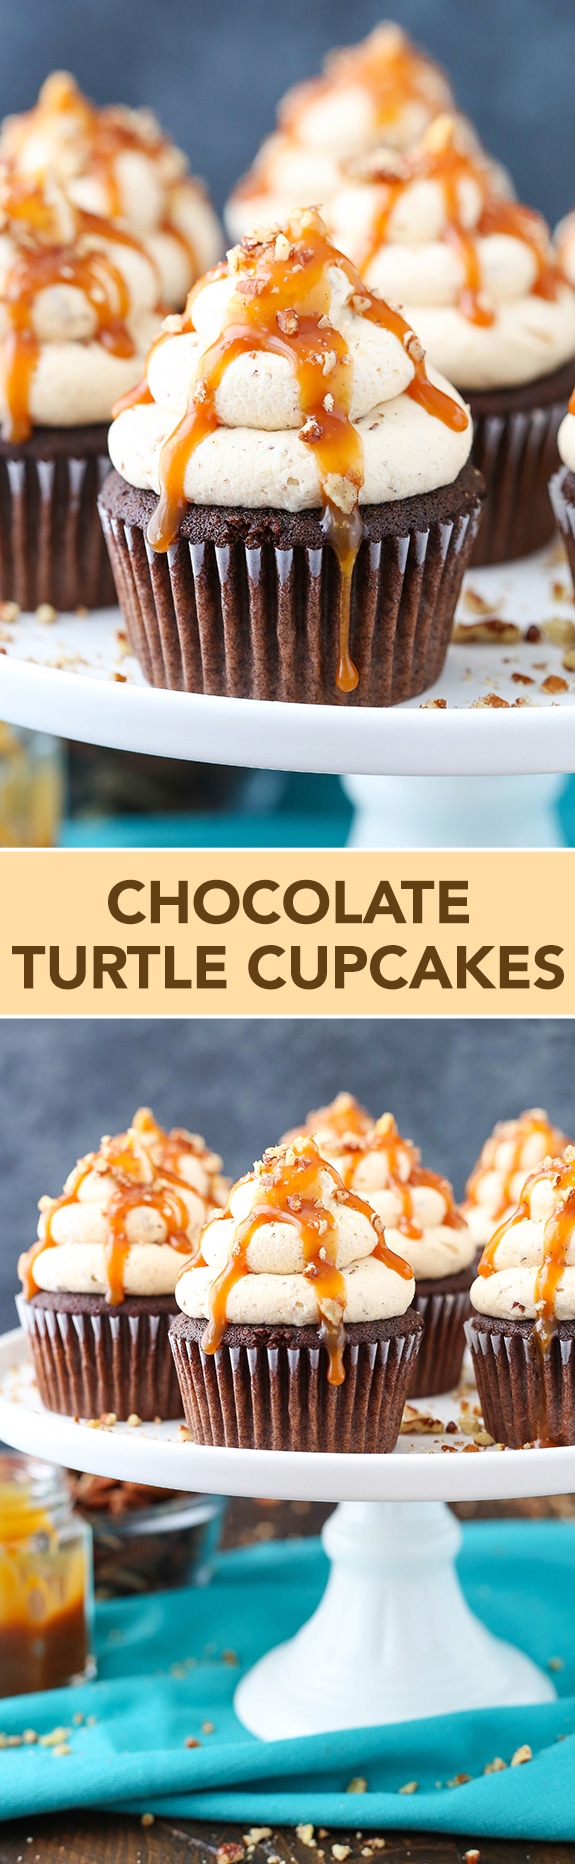 Chocolate Turtle Cupcakes - chocolate cupcakes topped with caramel pecan frosting, caramel drizzle and chopped pecans